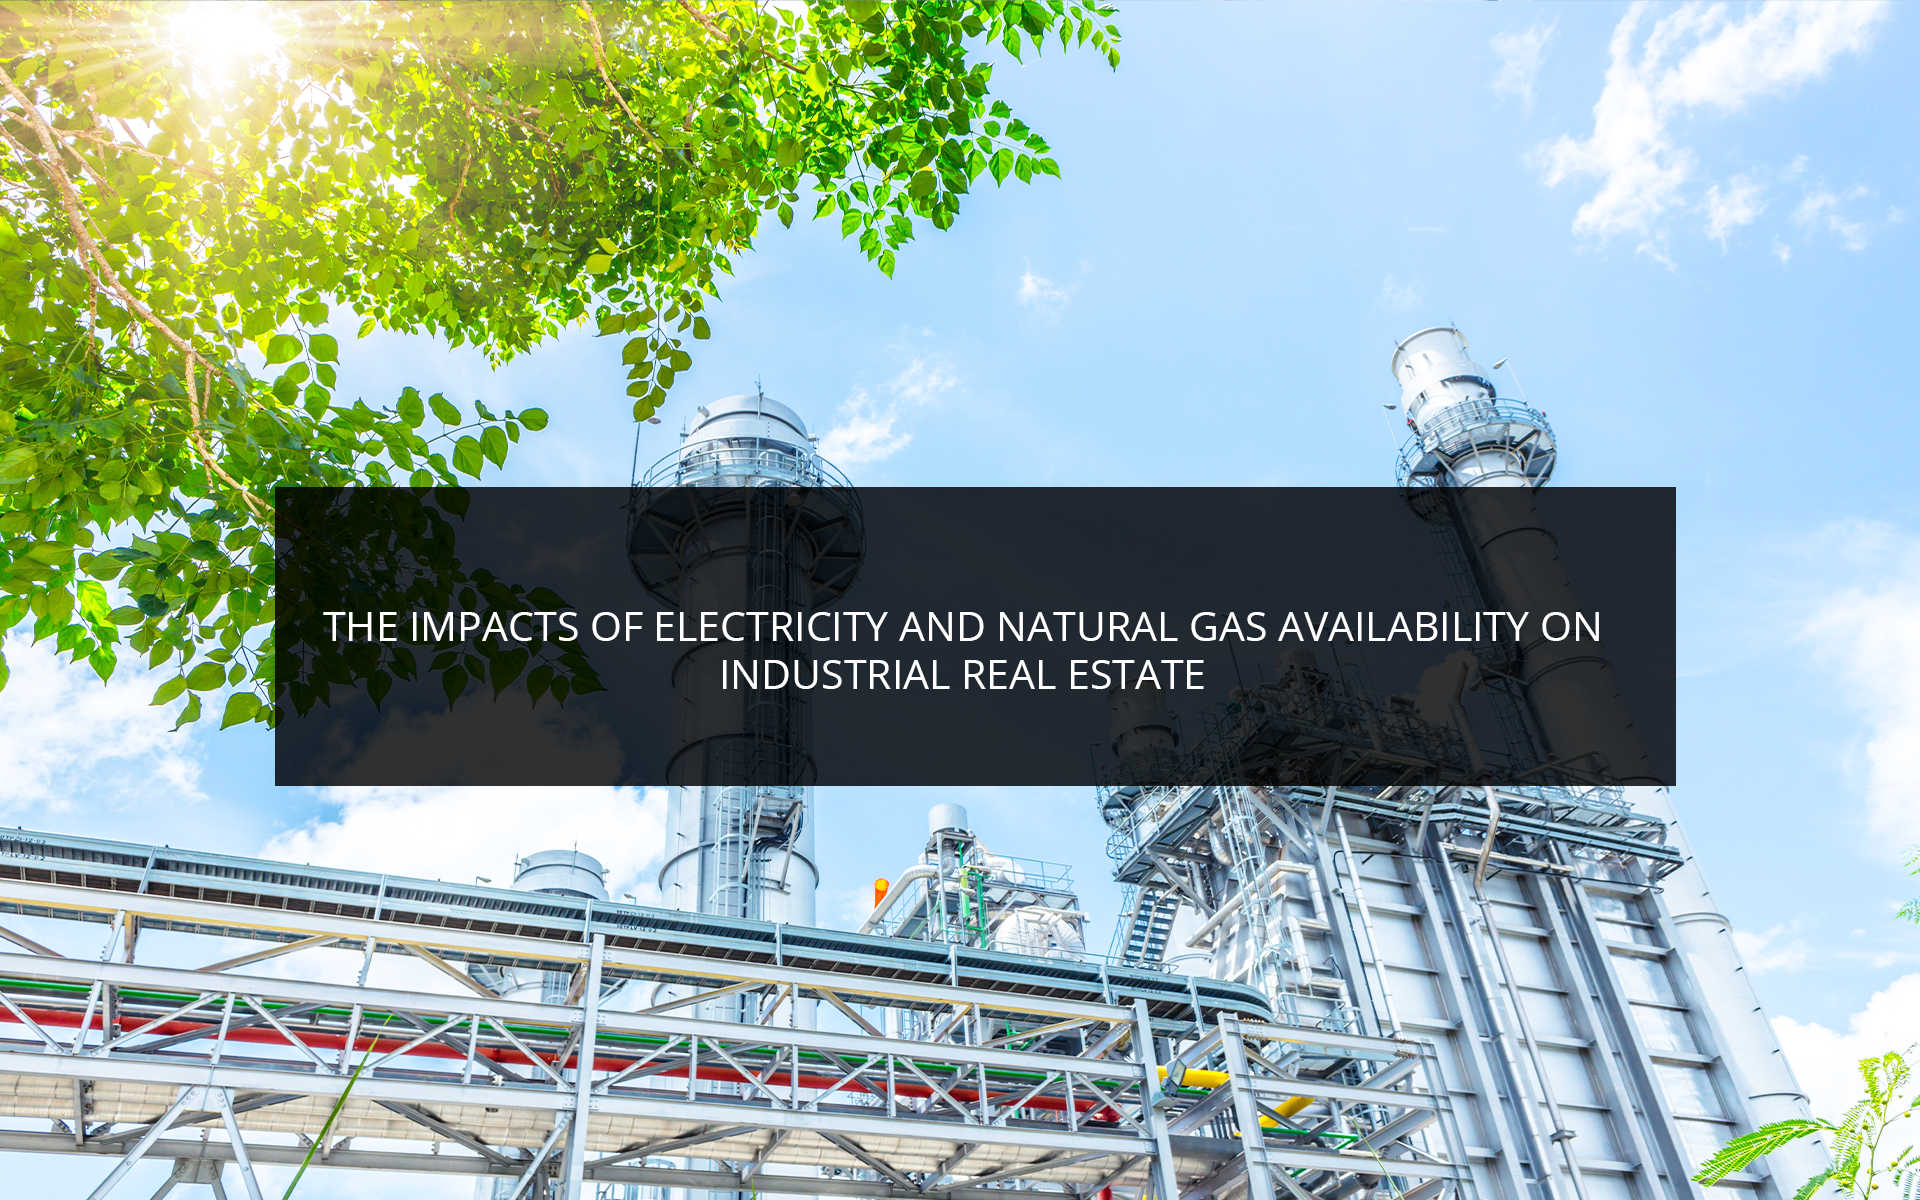 The Impacts of Electricity and Natural Gas Availability on Industrial Real Estate